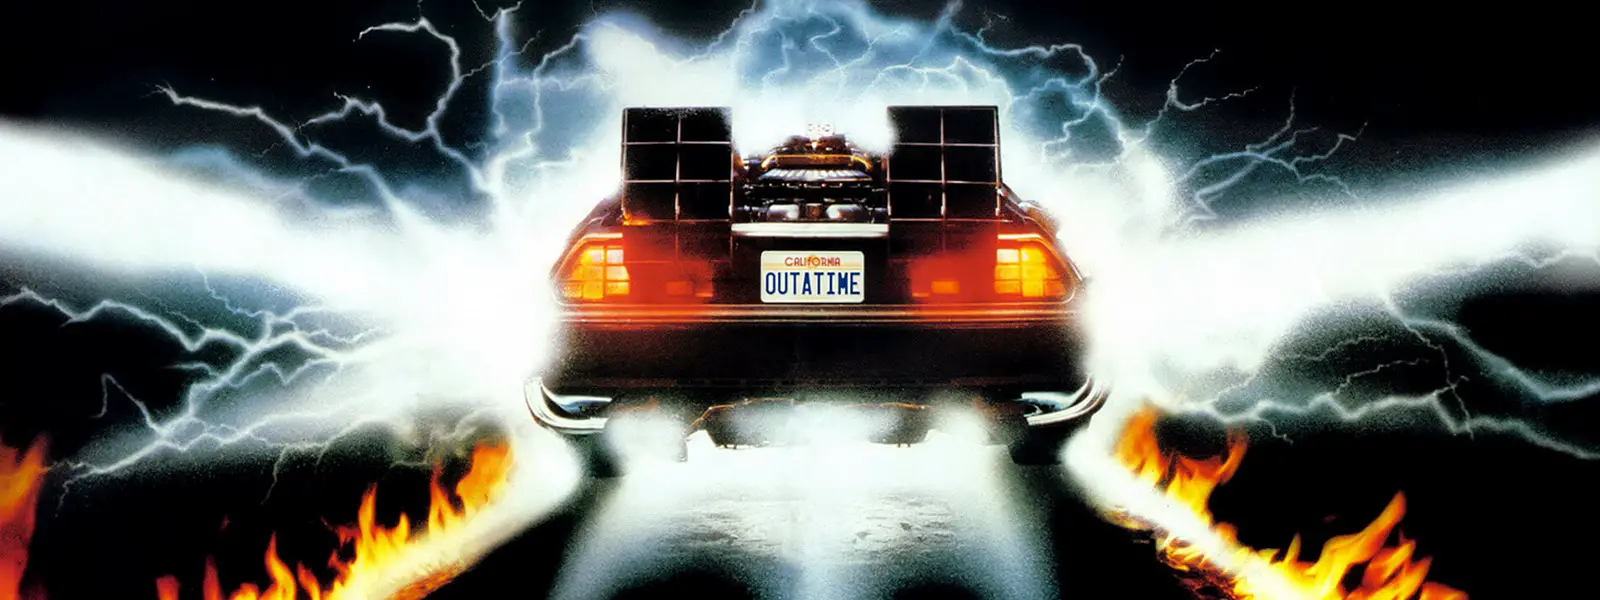 back to the future timeline banner art